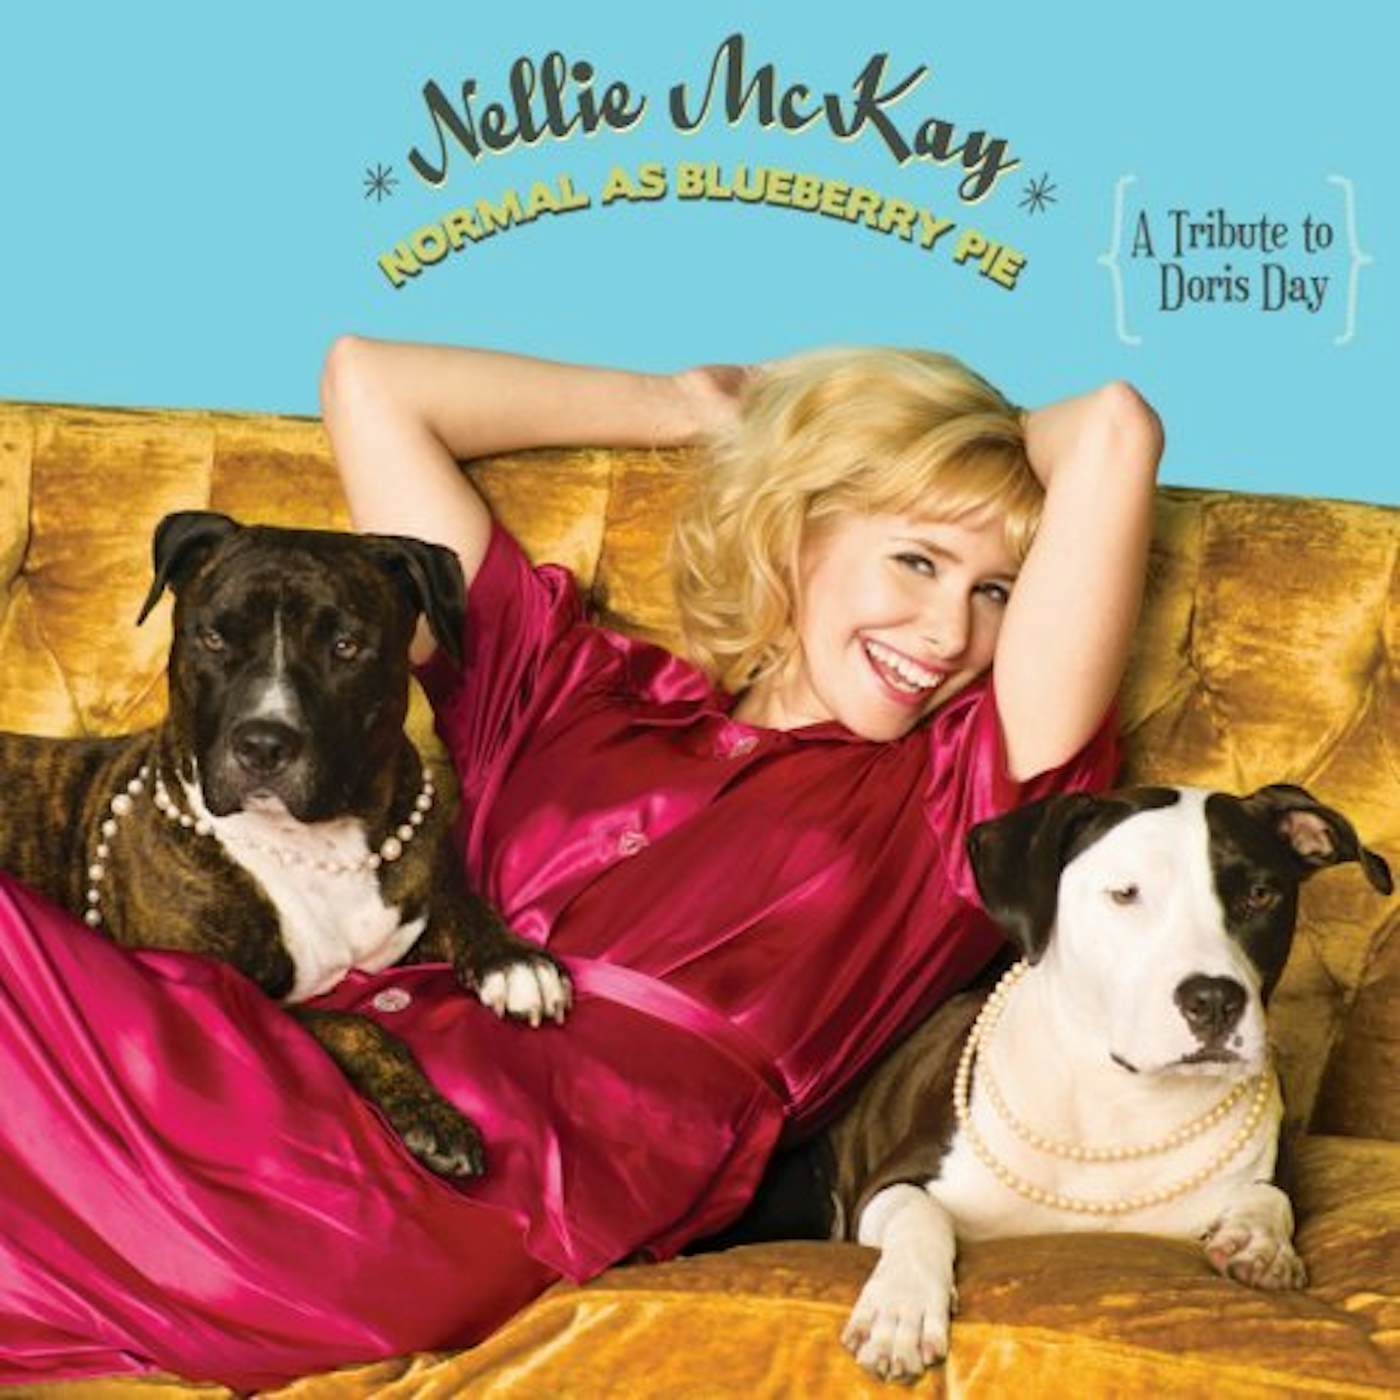 Nellie McKay NORMAL AS BLUEBERRY PIE: A TRIBUTE TO DORIS DAY CD